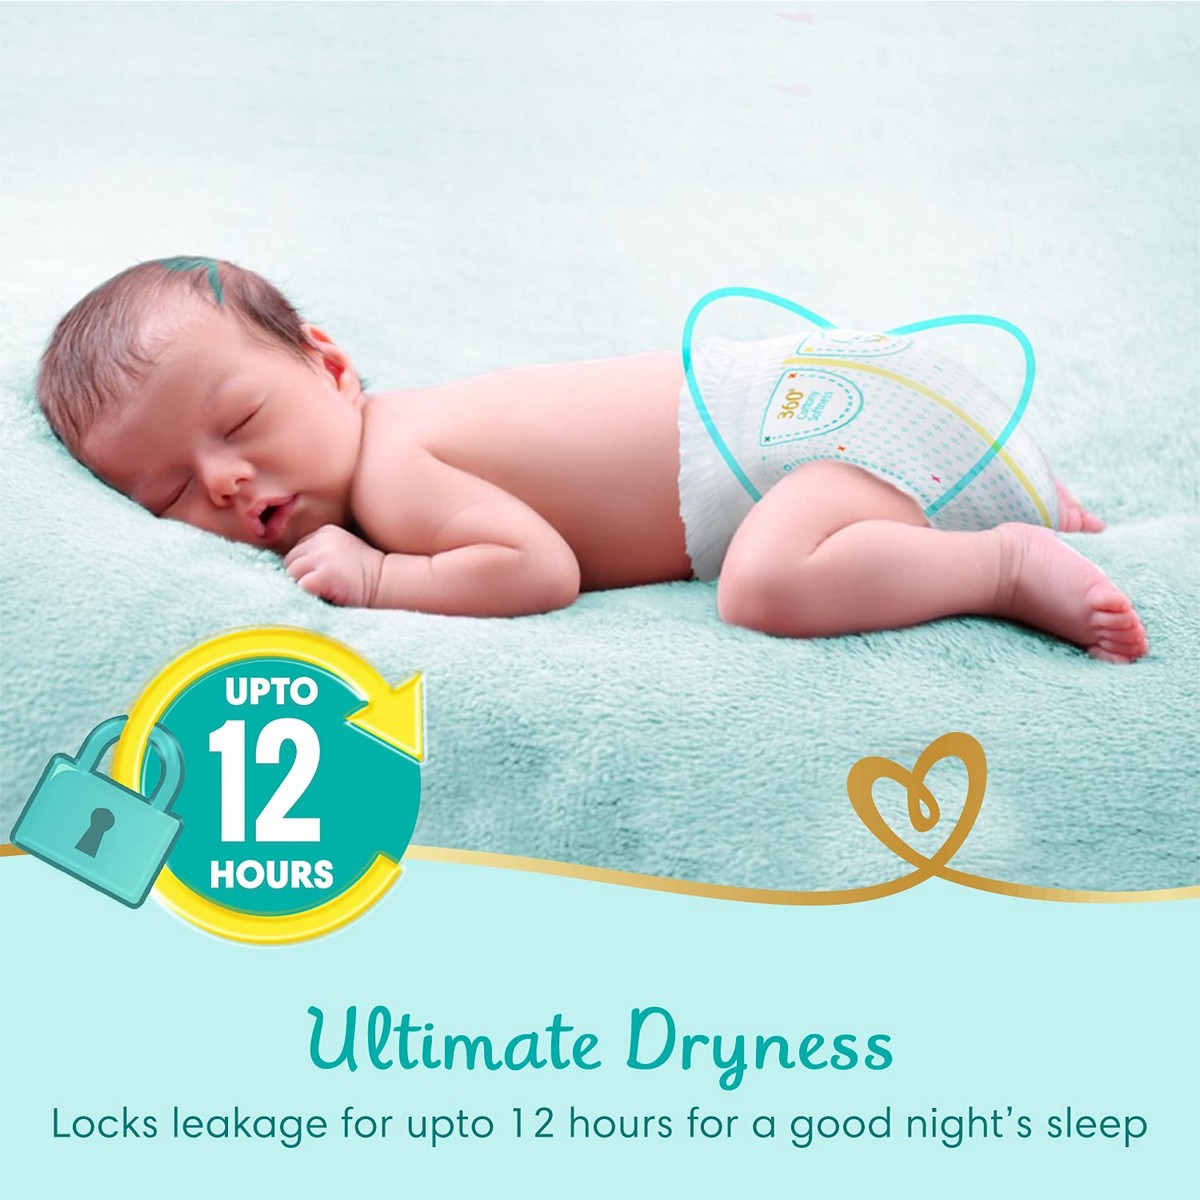 Pampers Pants Medium  2 Pieces  Namma Maligai  Online Grocery Store in  Coimbatore  Fruits store in Coimbatore  Online Grocery